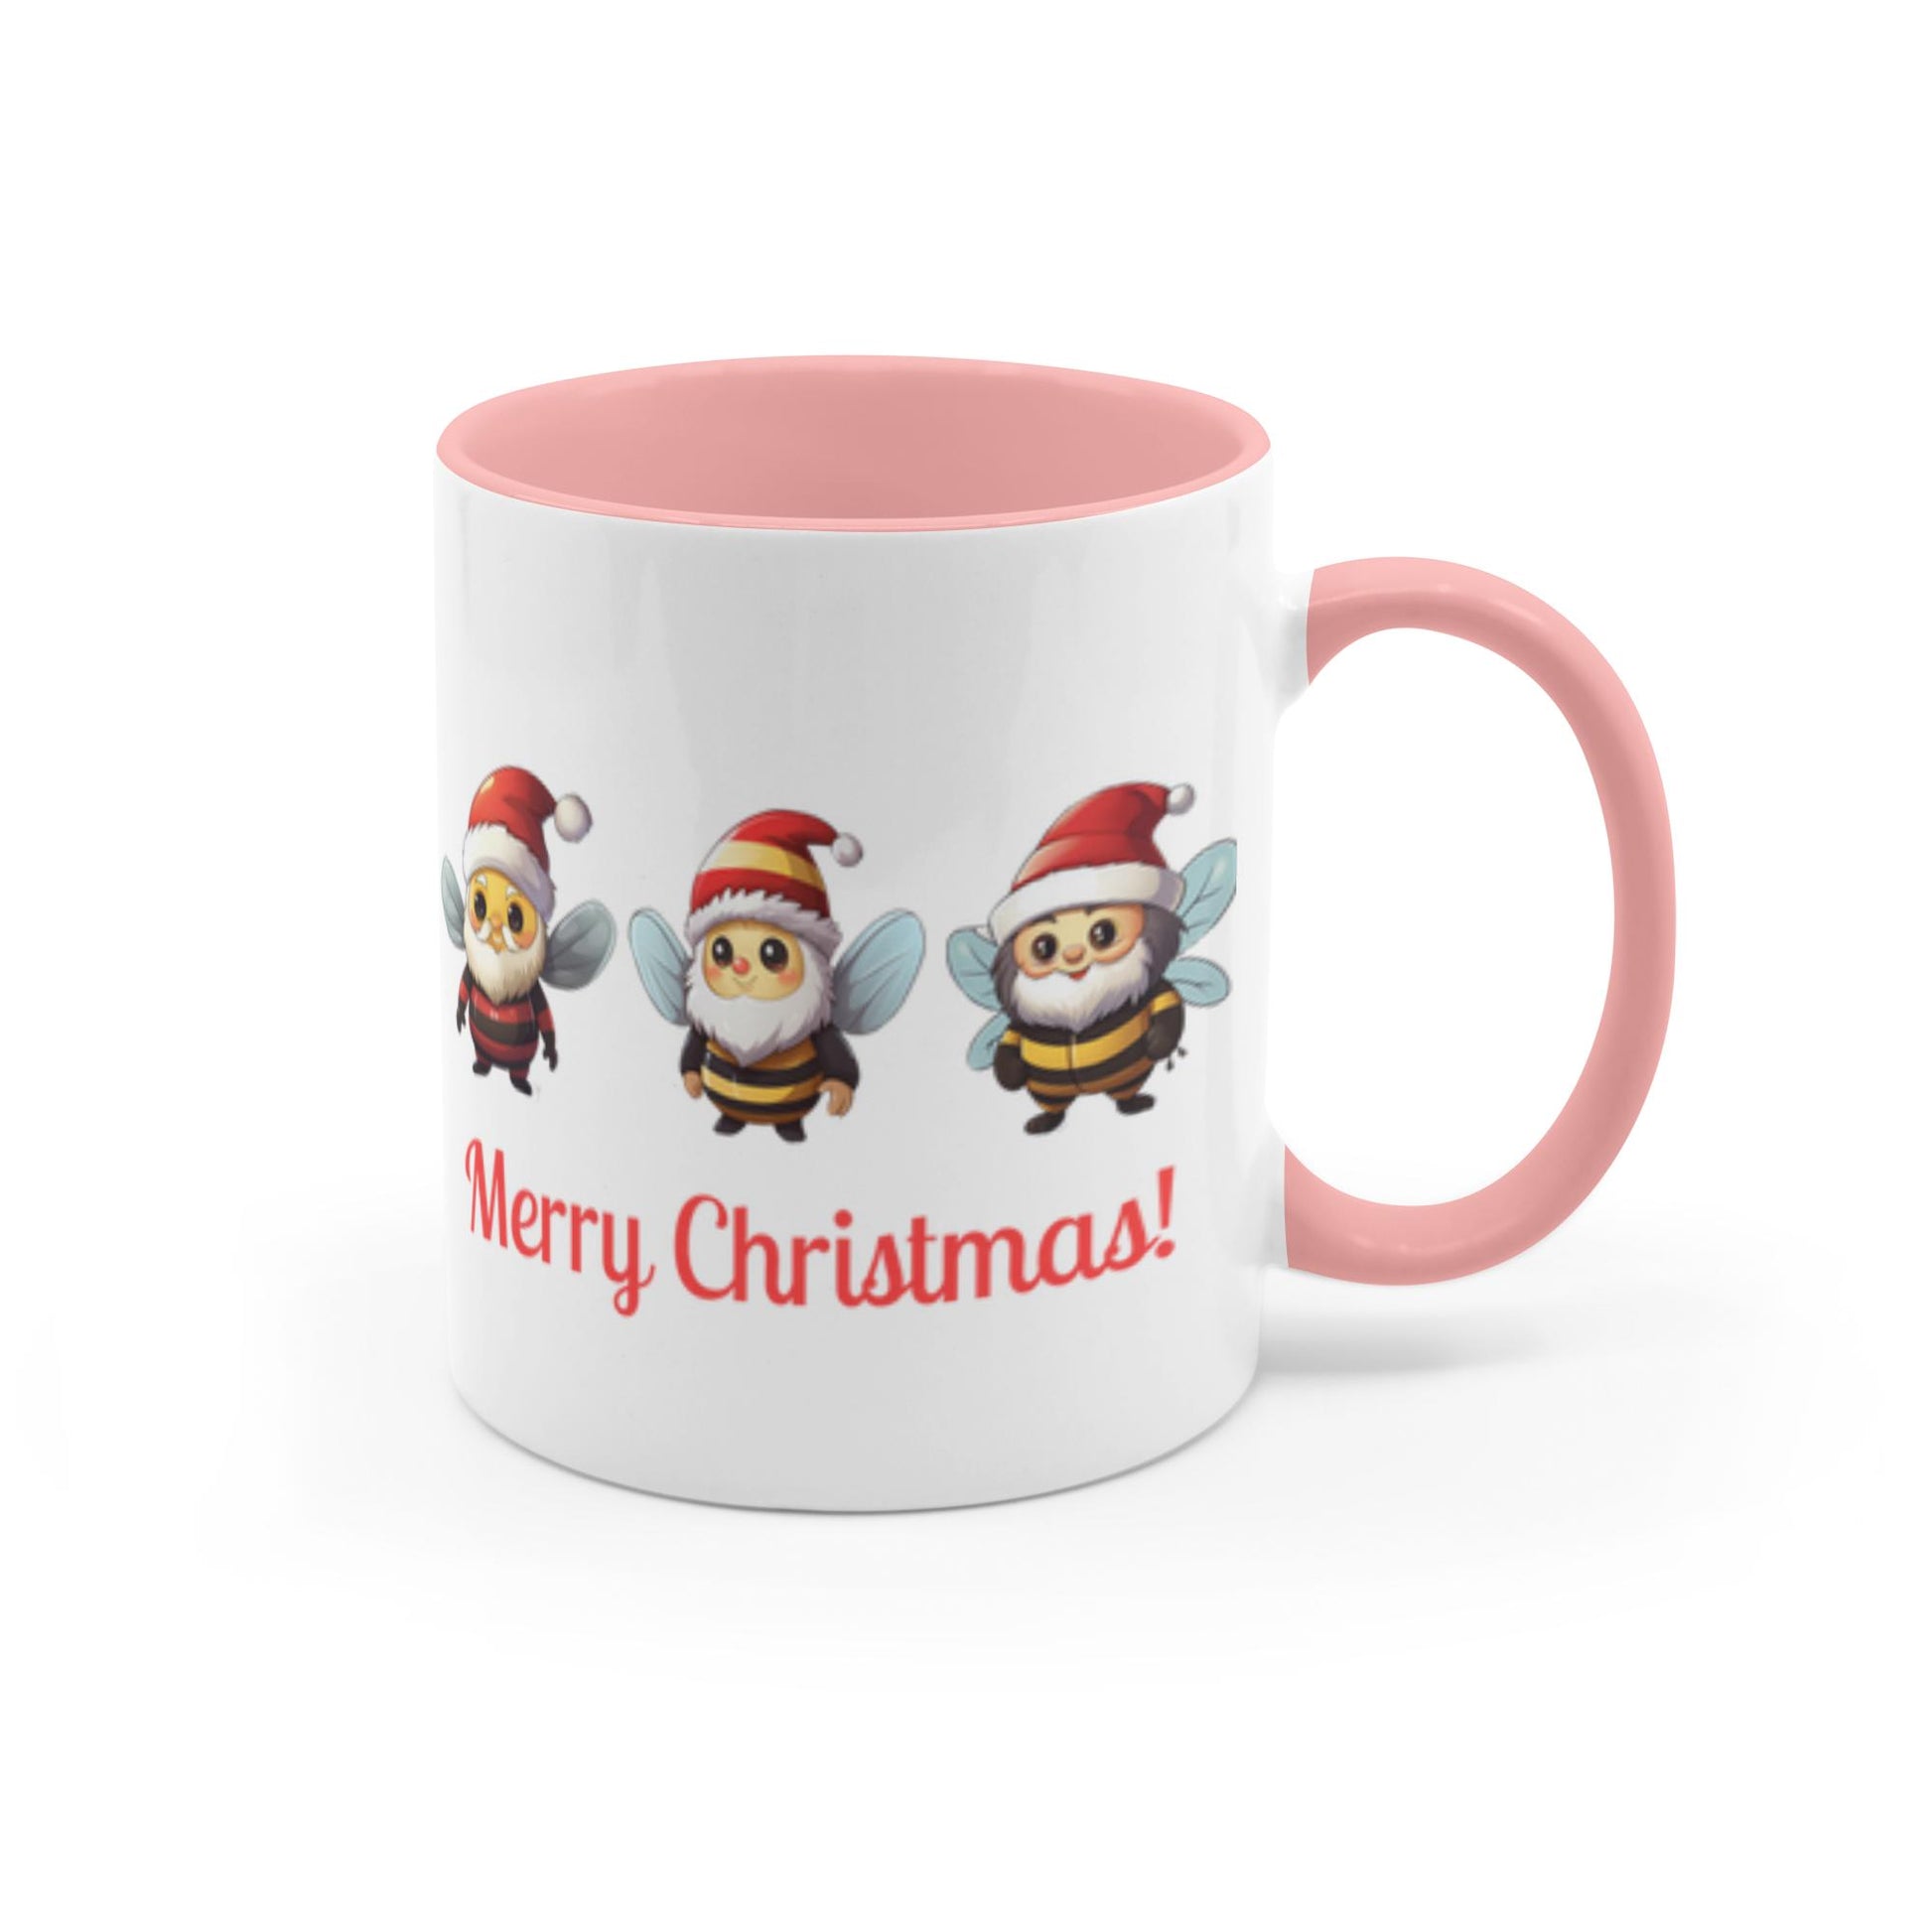 Merry Christmas 11 oz. Accent Mug 11 oz White with Pink Accents Coffee & Tea Cups gifts holiday store